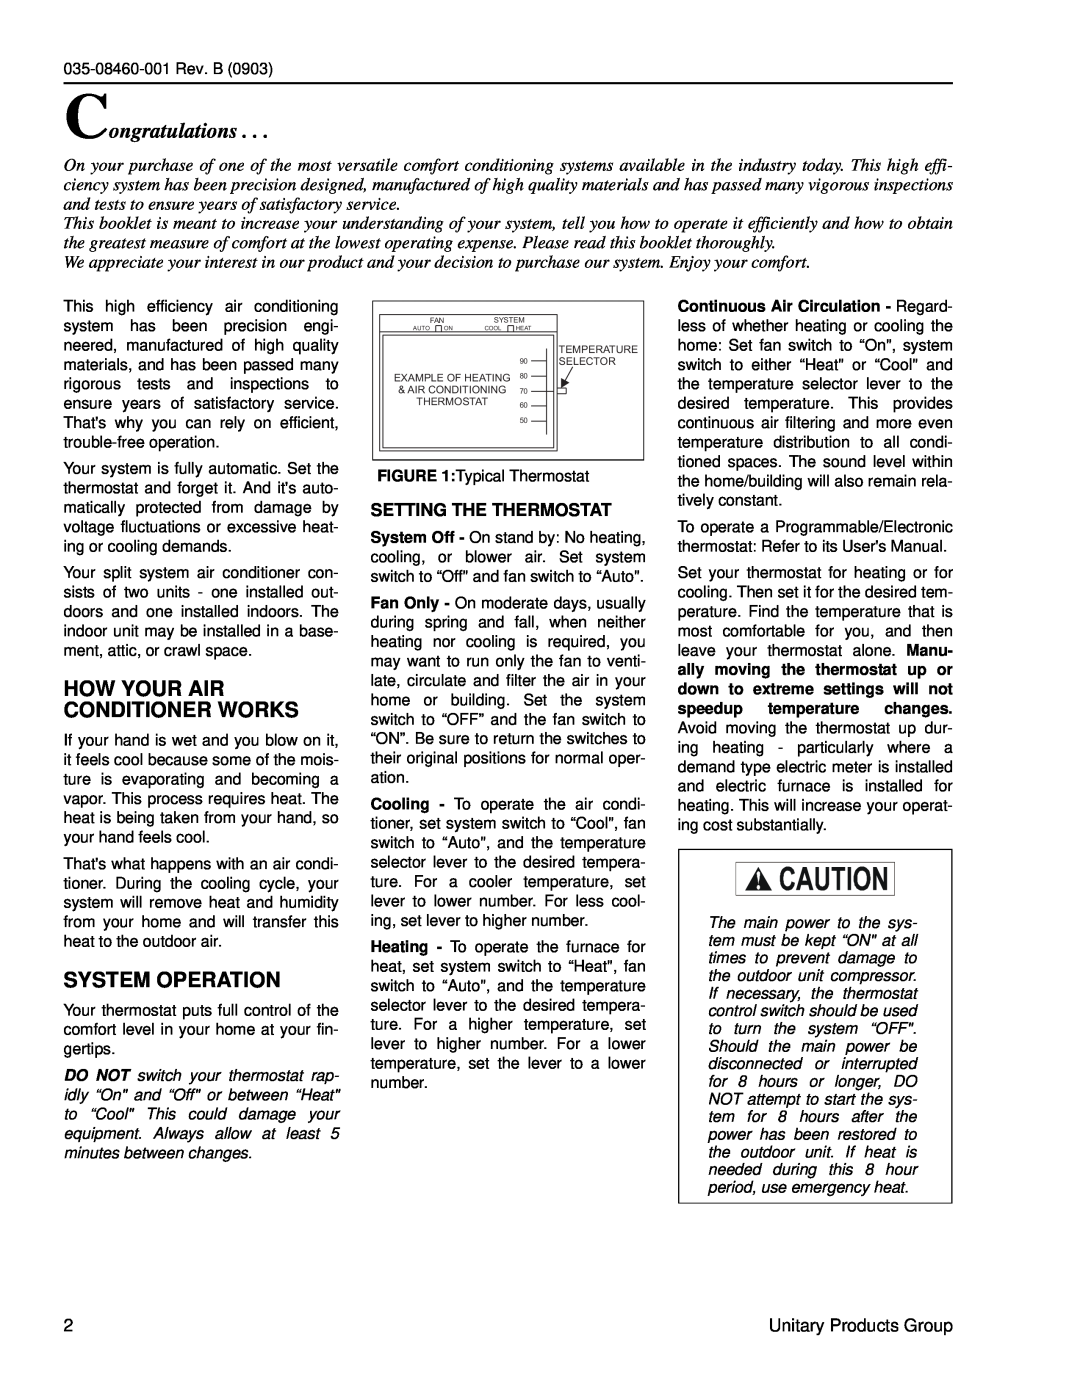 York 035-08460-001 owner manual How Your Air Conditioner Works, System Operation, Setting The Thermostat, Congratulations 